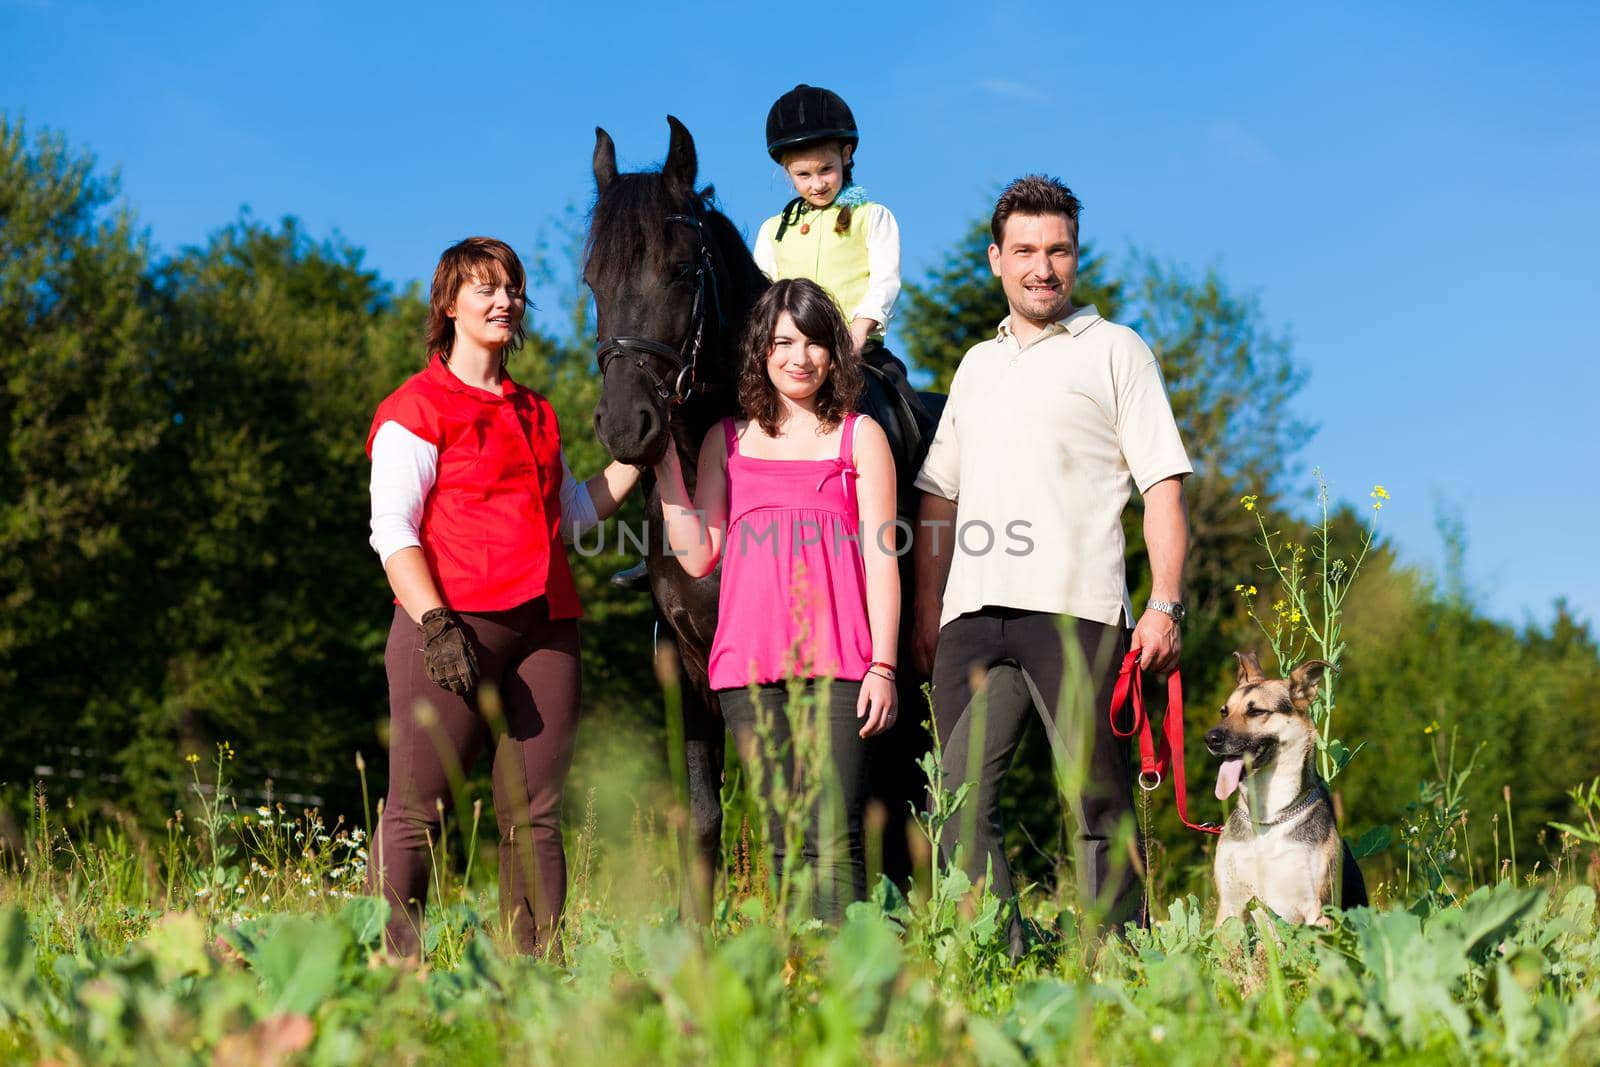 Family with children posing with a horse, one child riding the animal